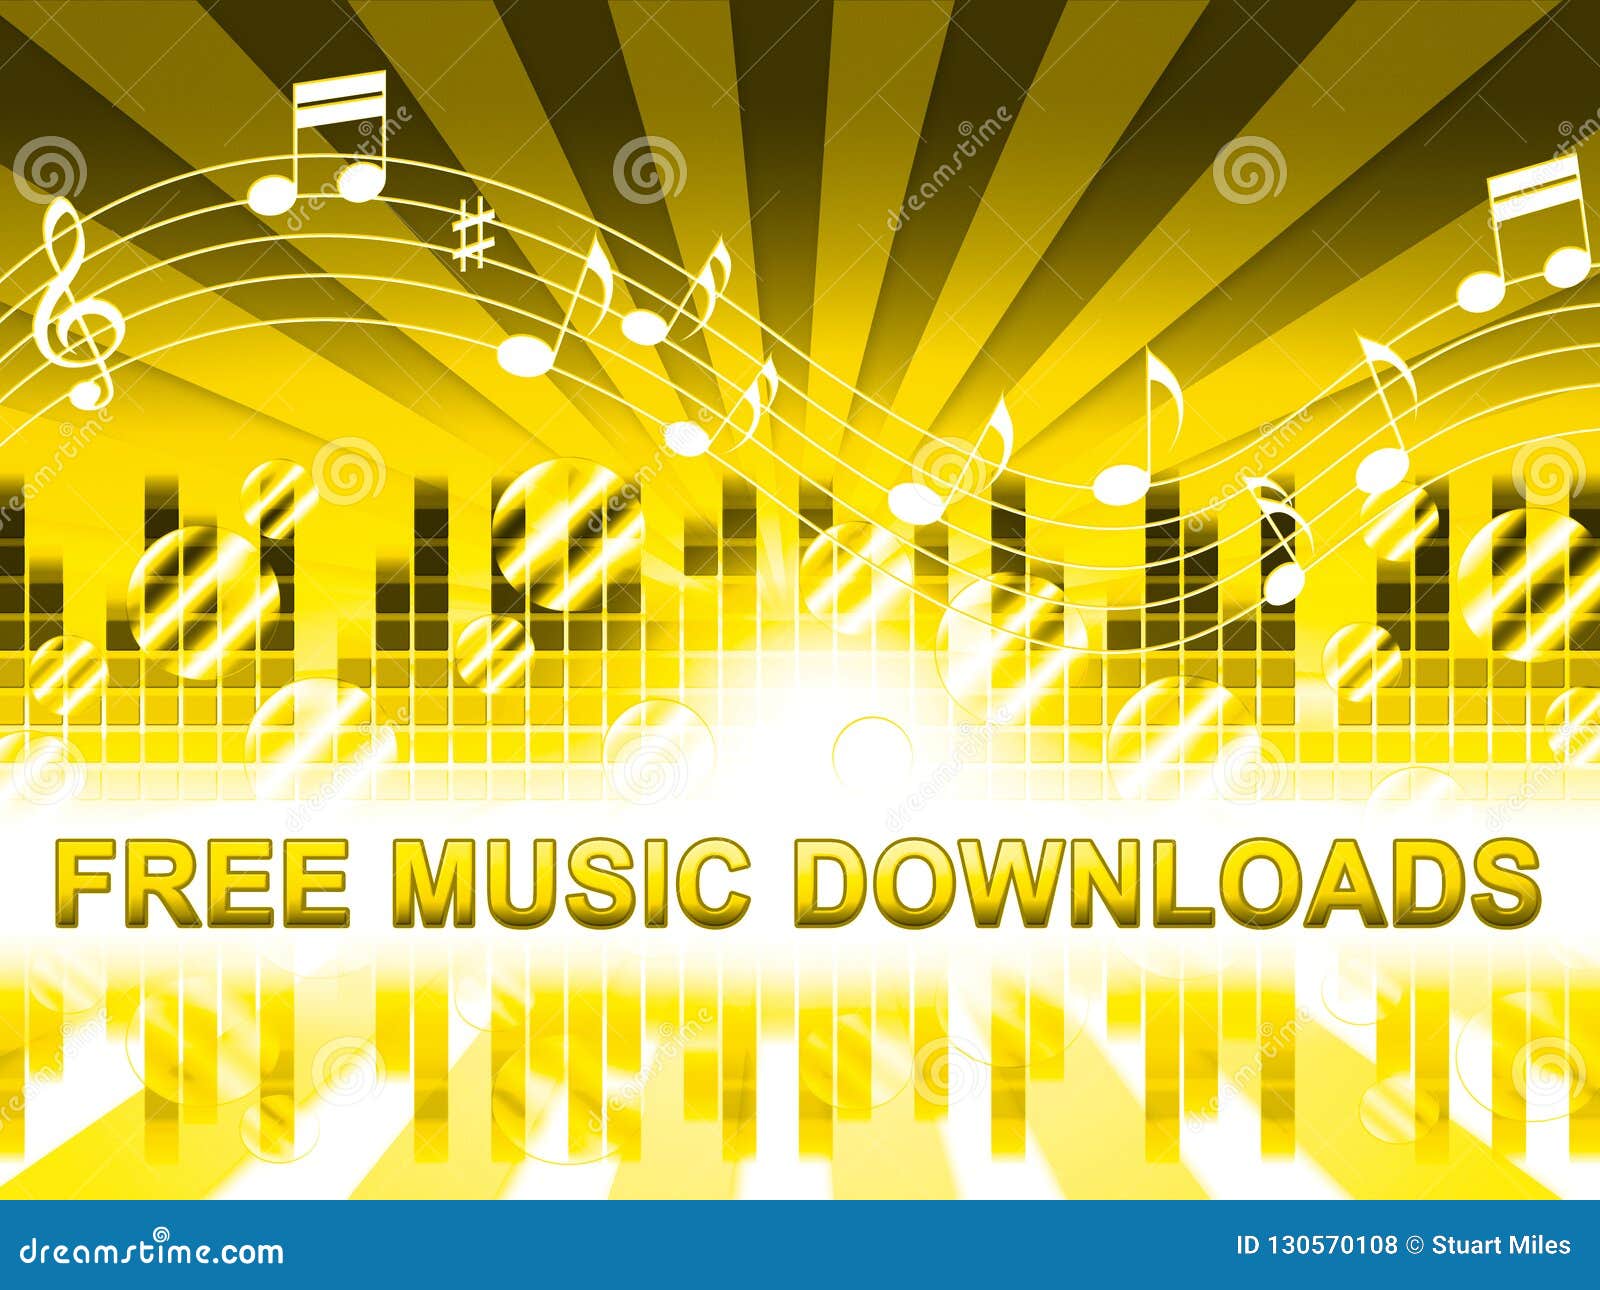 free music downloads shows no cost mp3